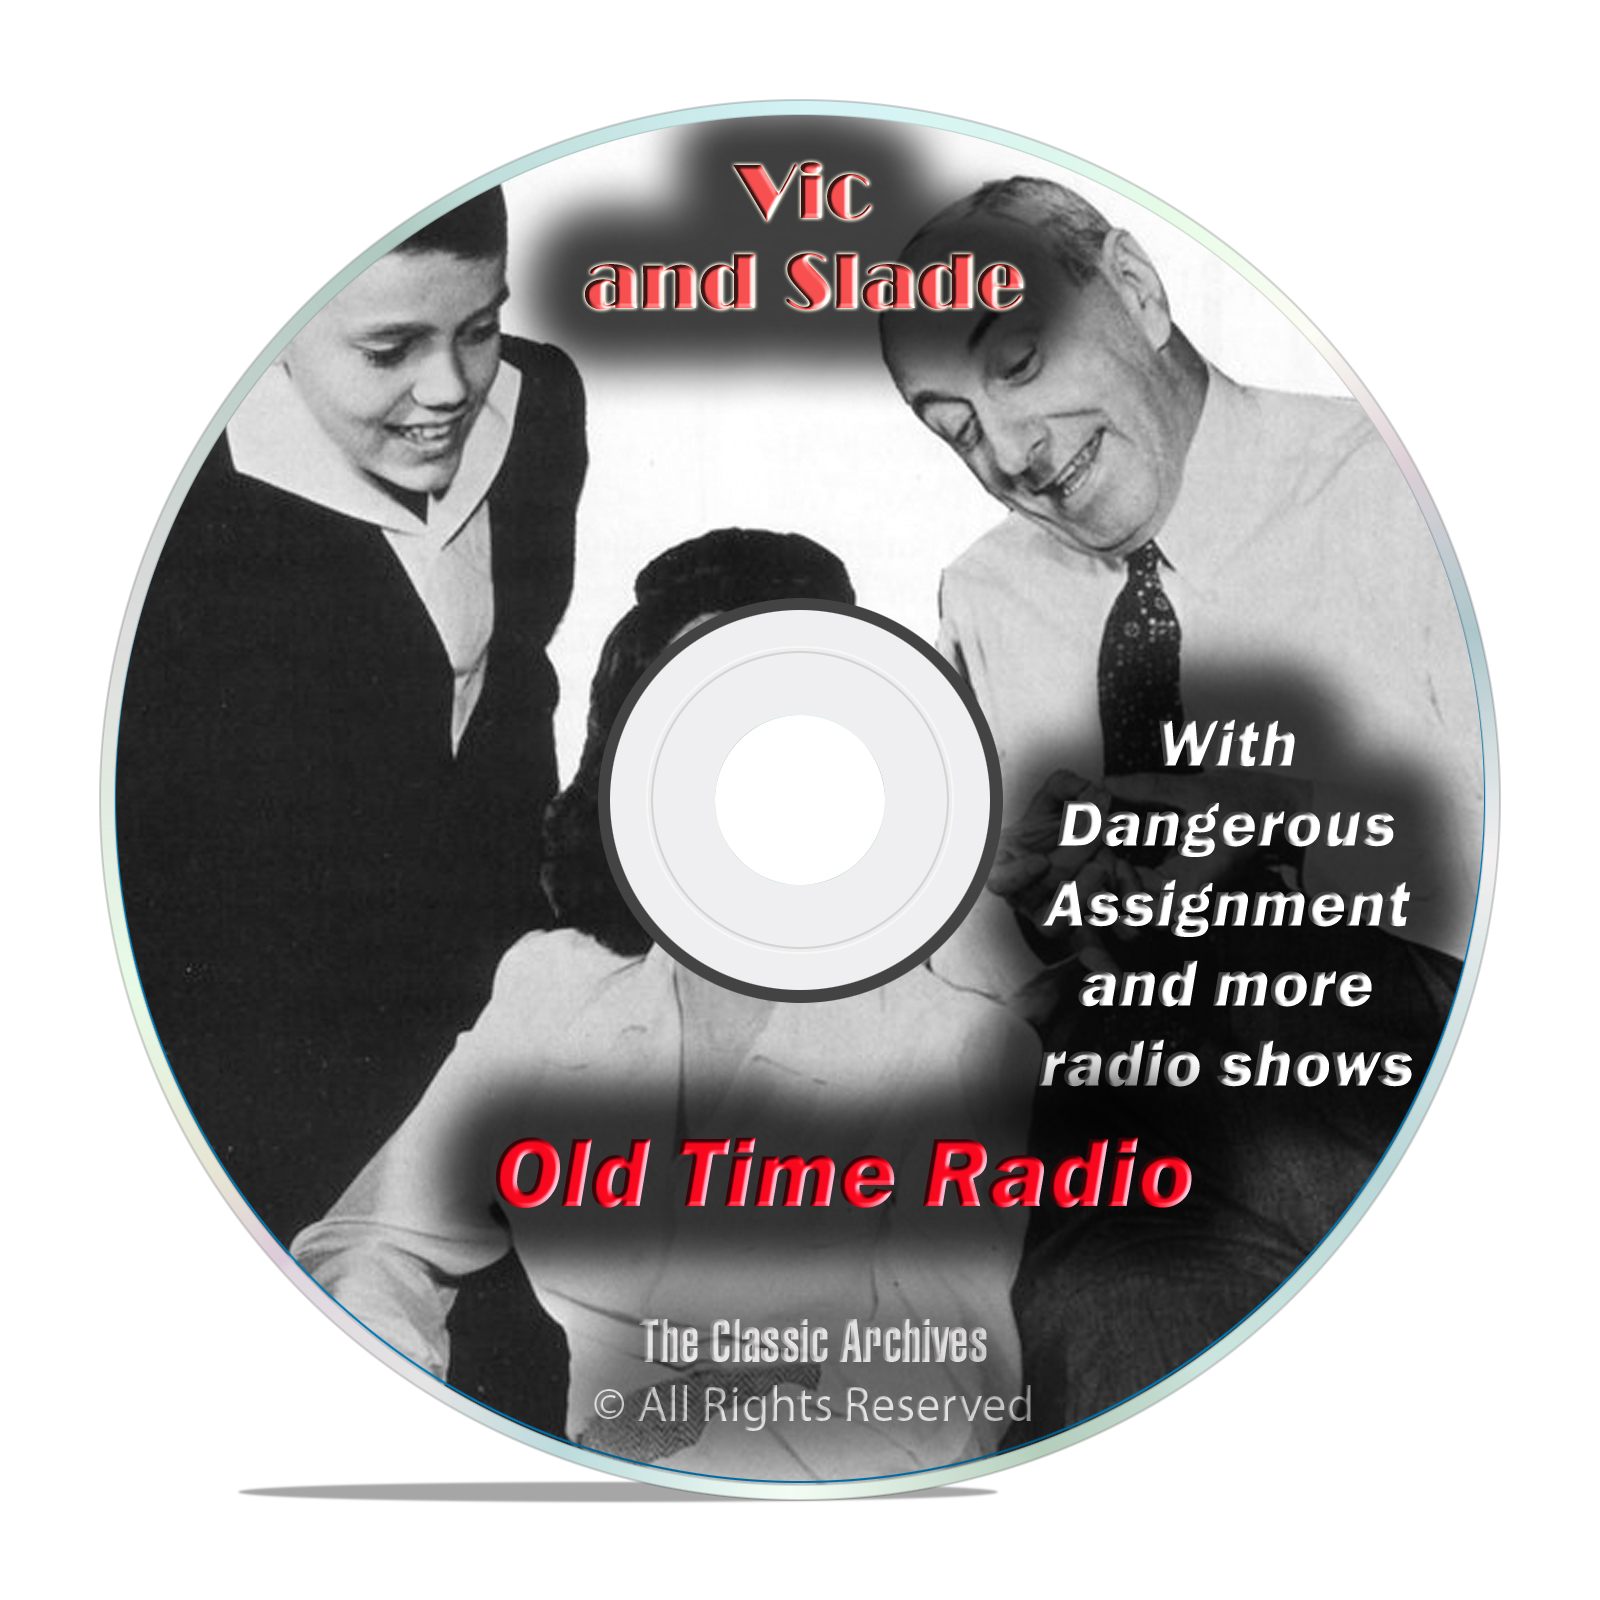 Vic and Slade, 942 Classic Old Time Radio Shows Soap Drama OTR mp3 DVD